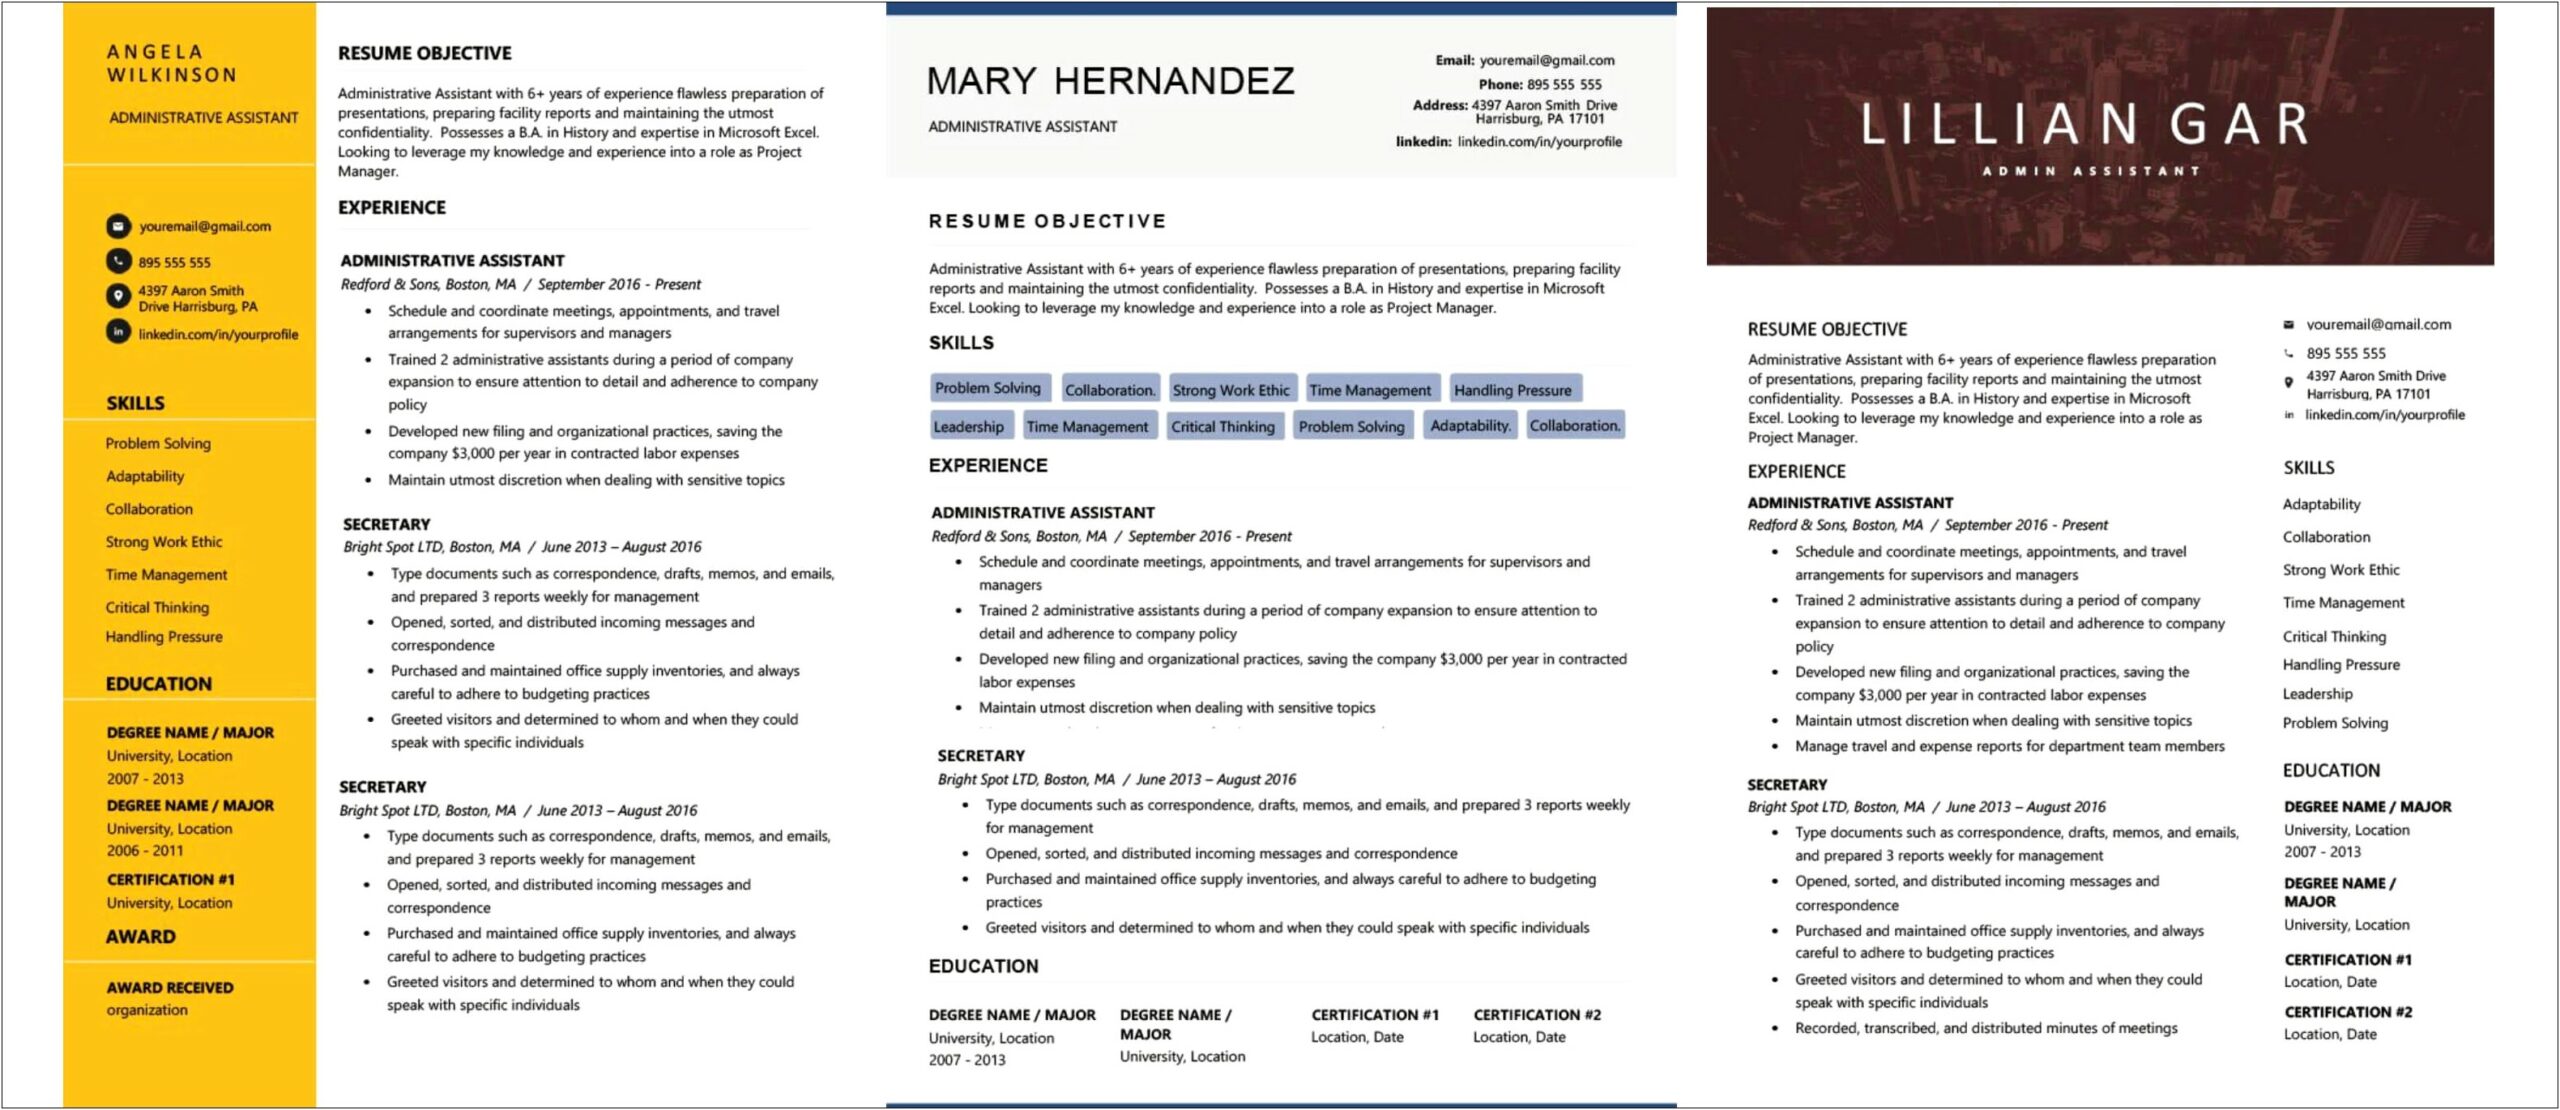 Find Resumes Posted Online Free